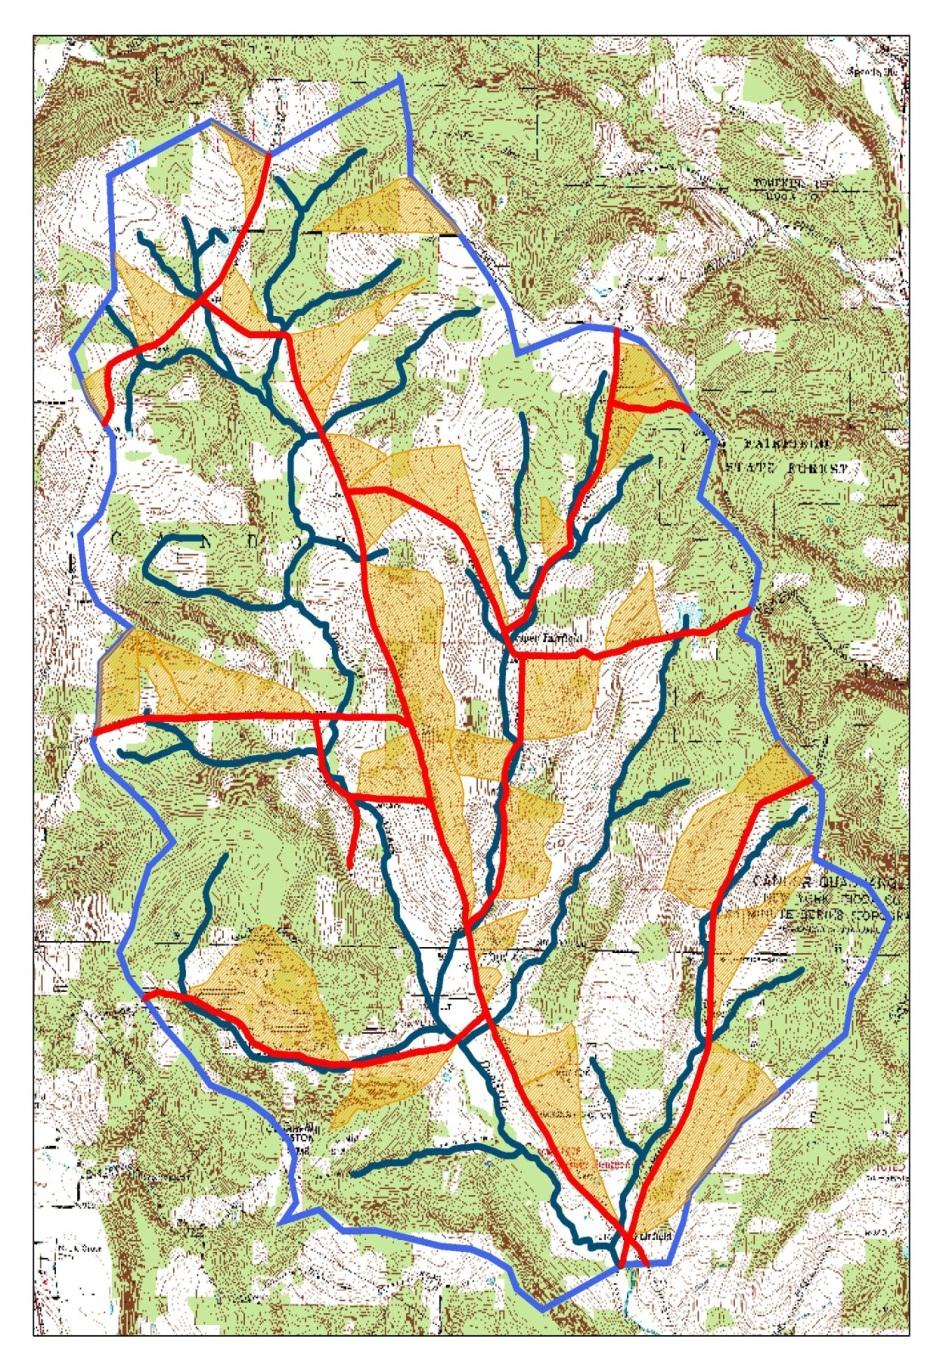 Results Drainage Mapping Ditch drainage basins potentially intercept ~22 % of the surface runoff and shallow groundwater